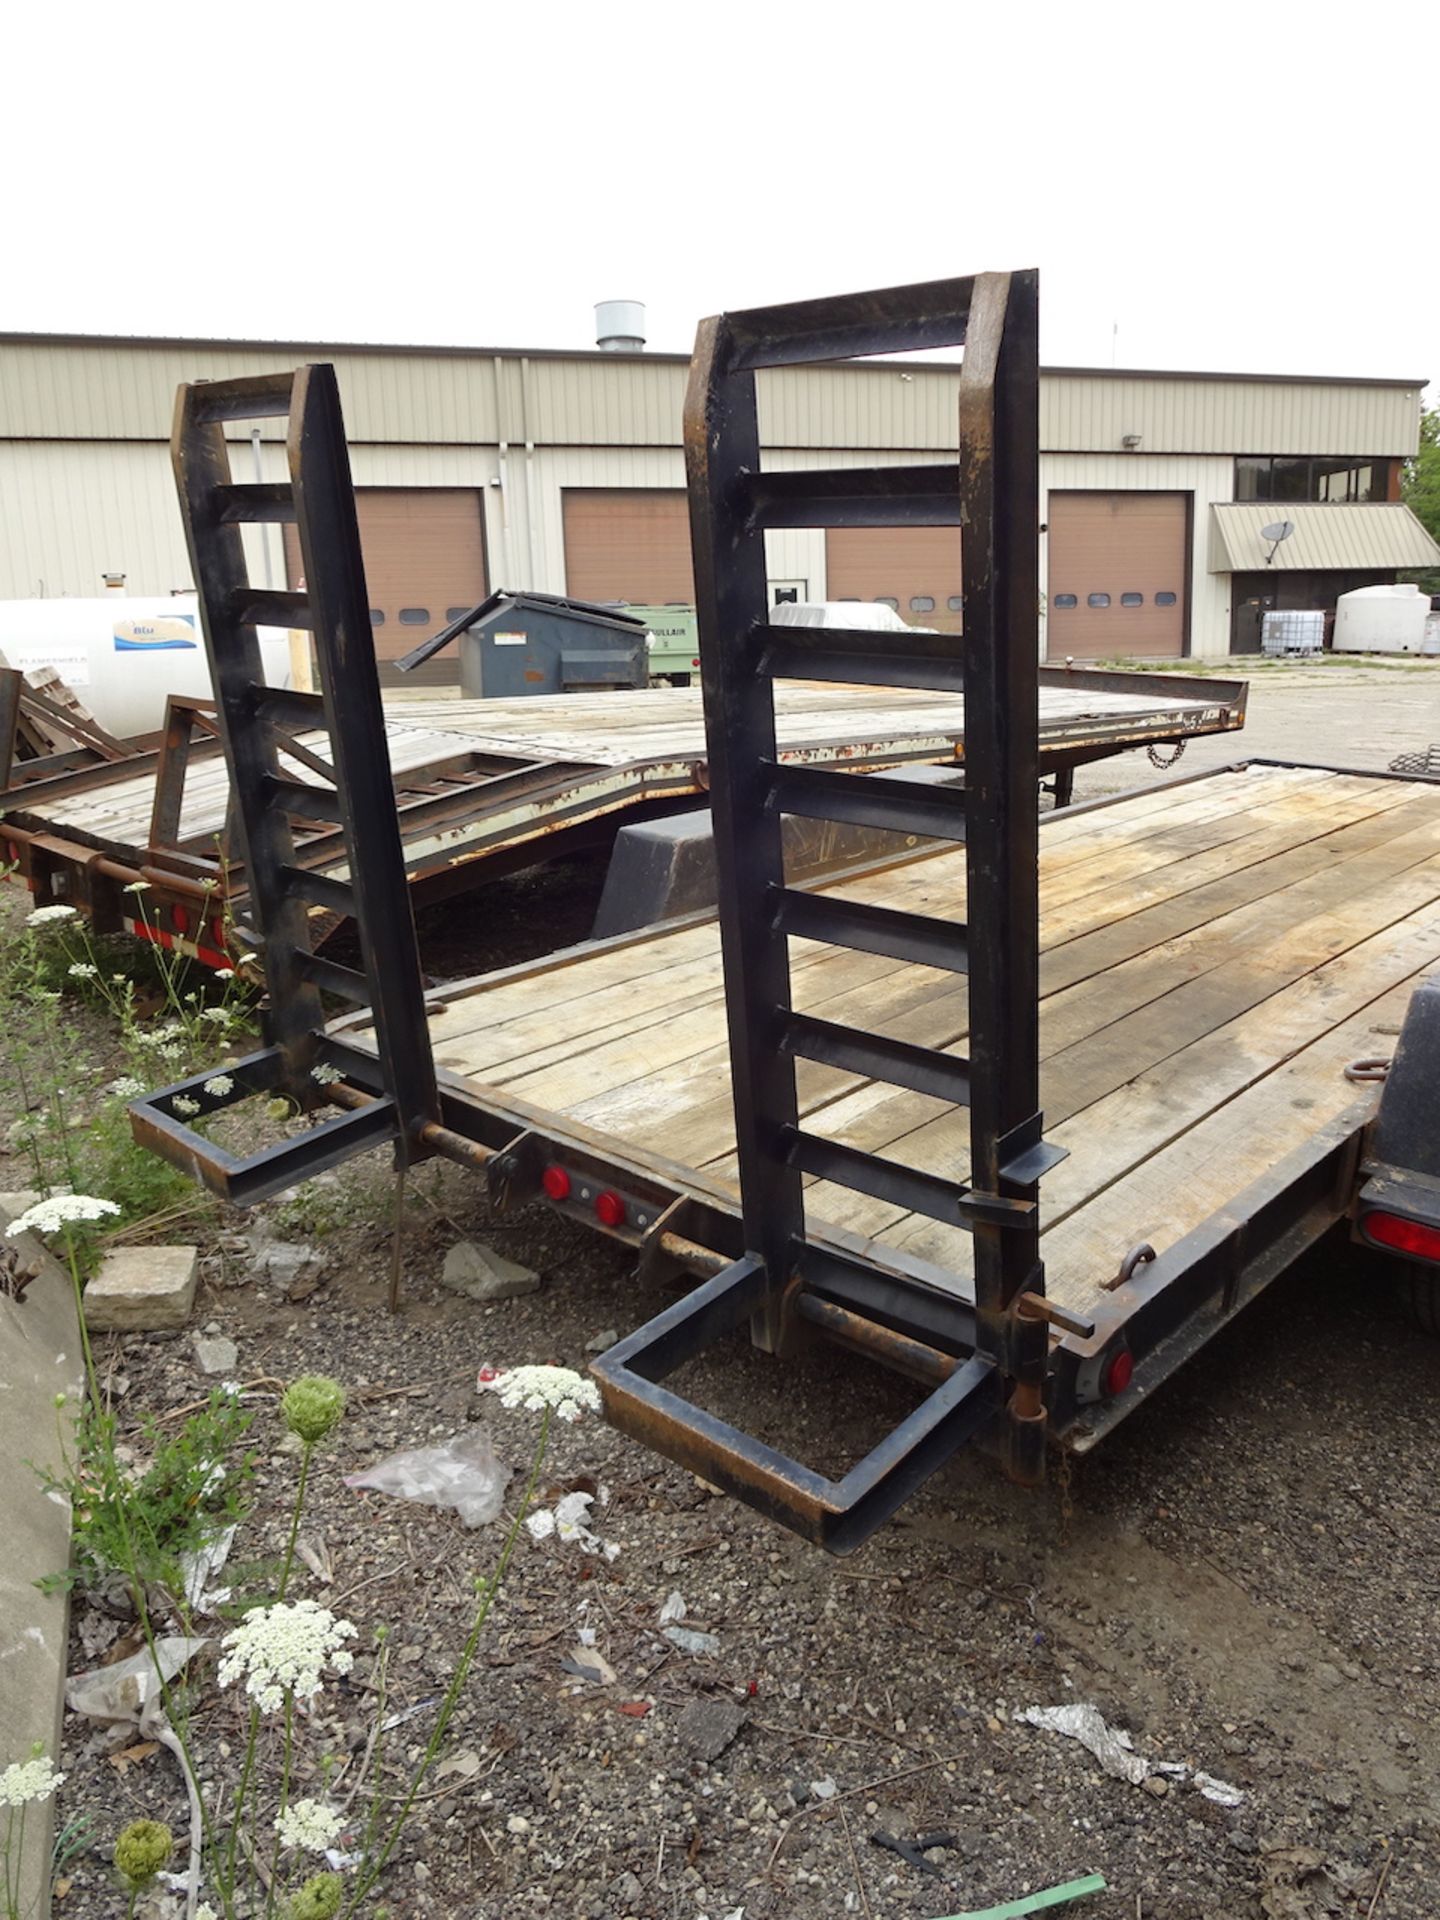 Equipment Trailer, 16 Ft. x 6 Ft. (Approx) - Image 4 of 6